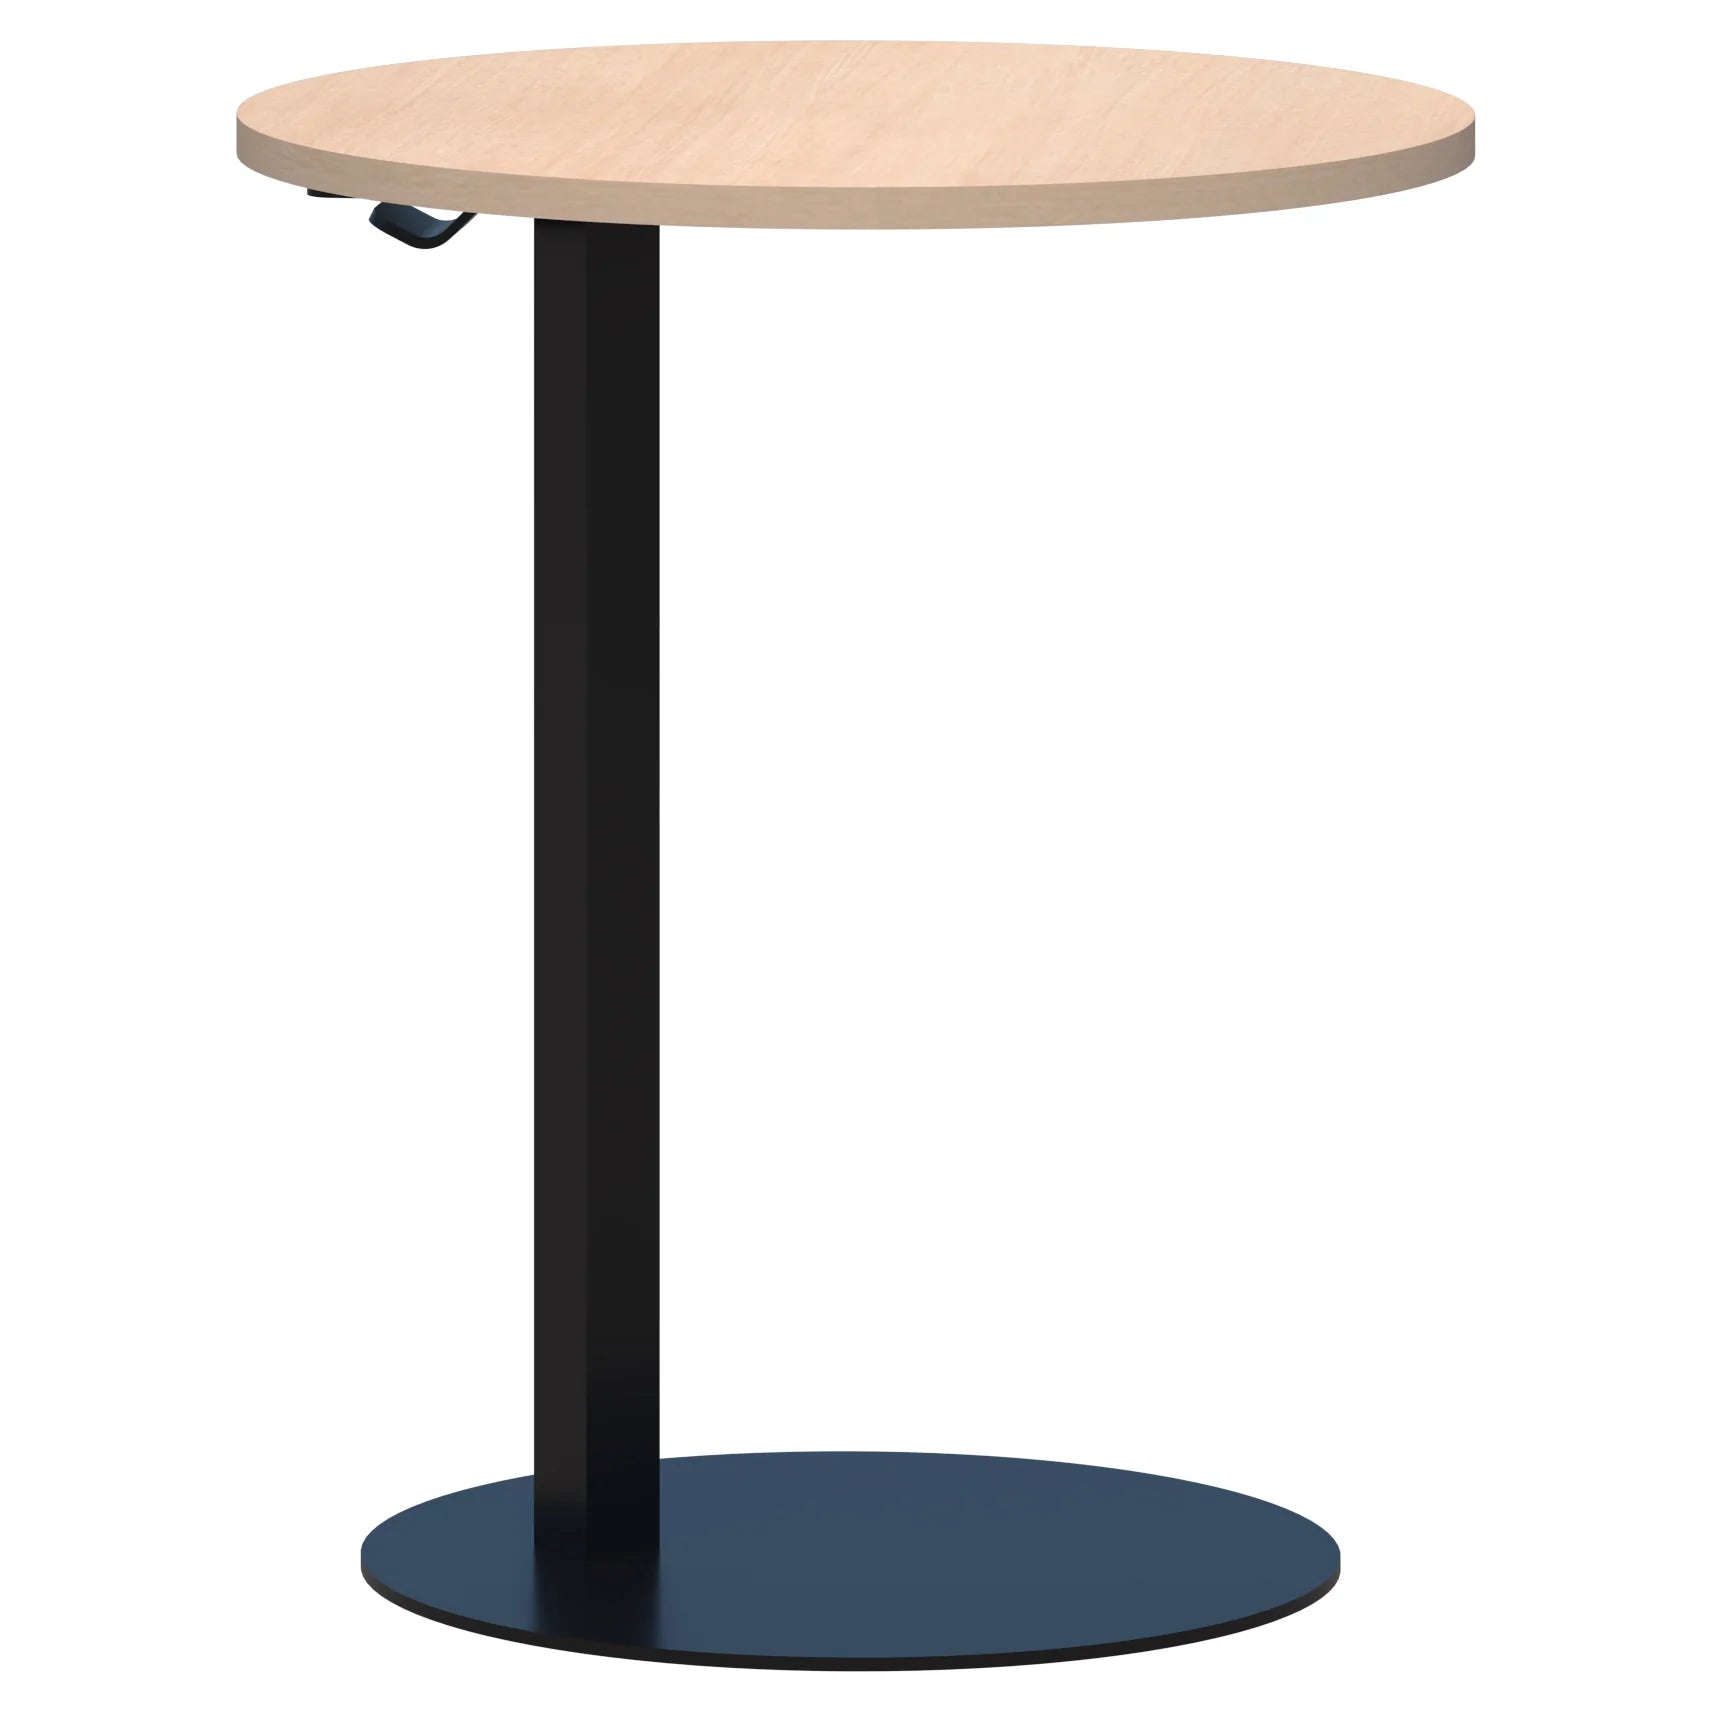 Memo laptop table with round top in refined oak and black pedestal base.